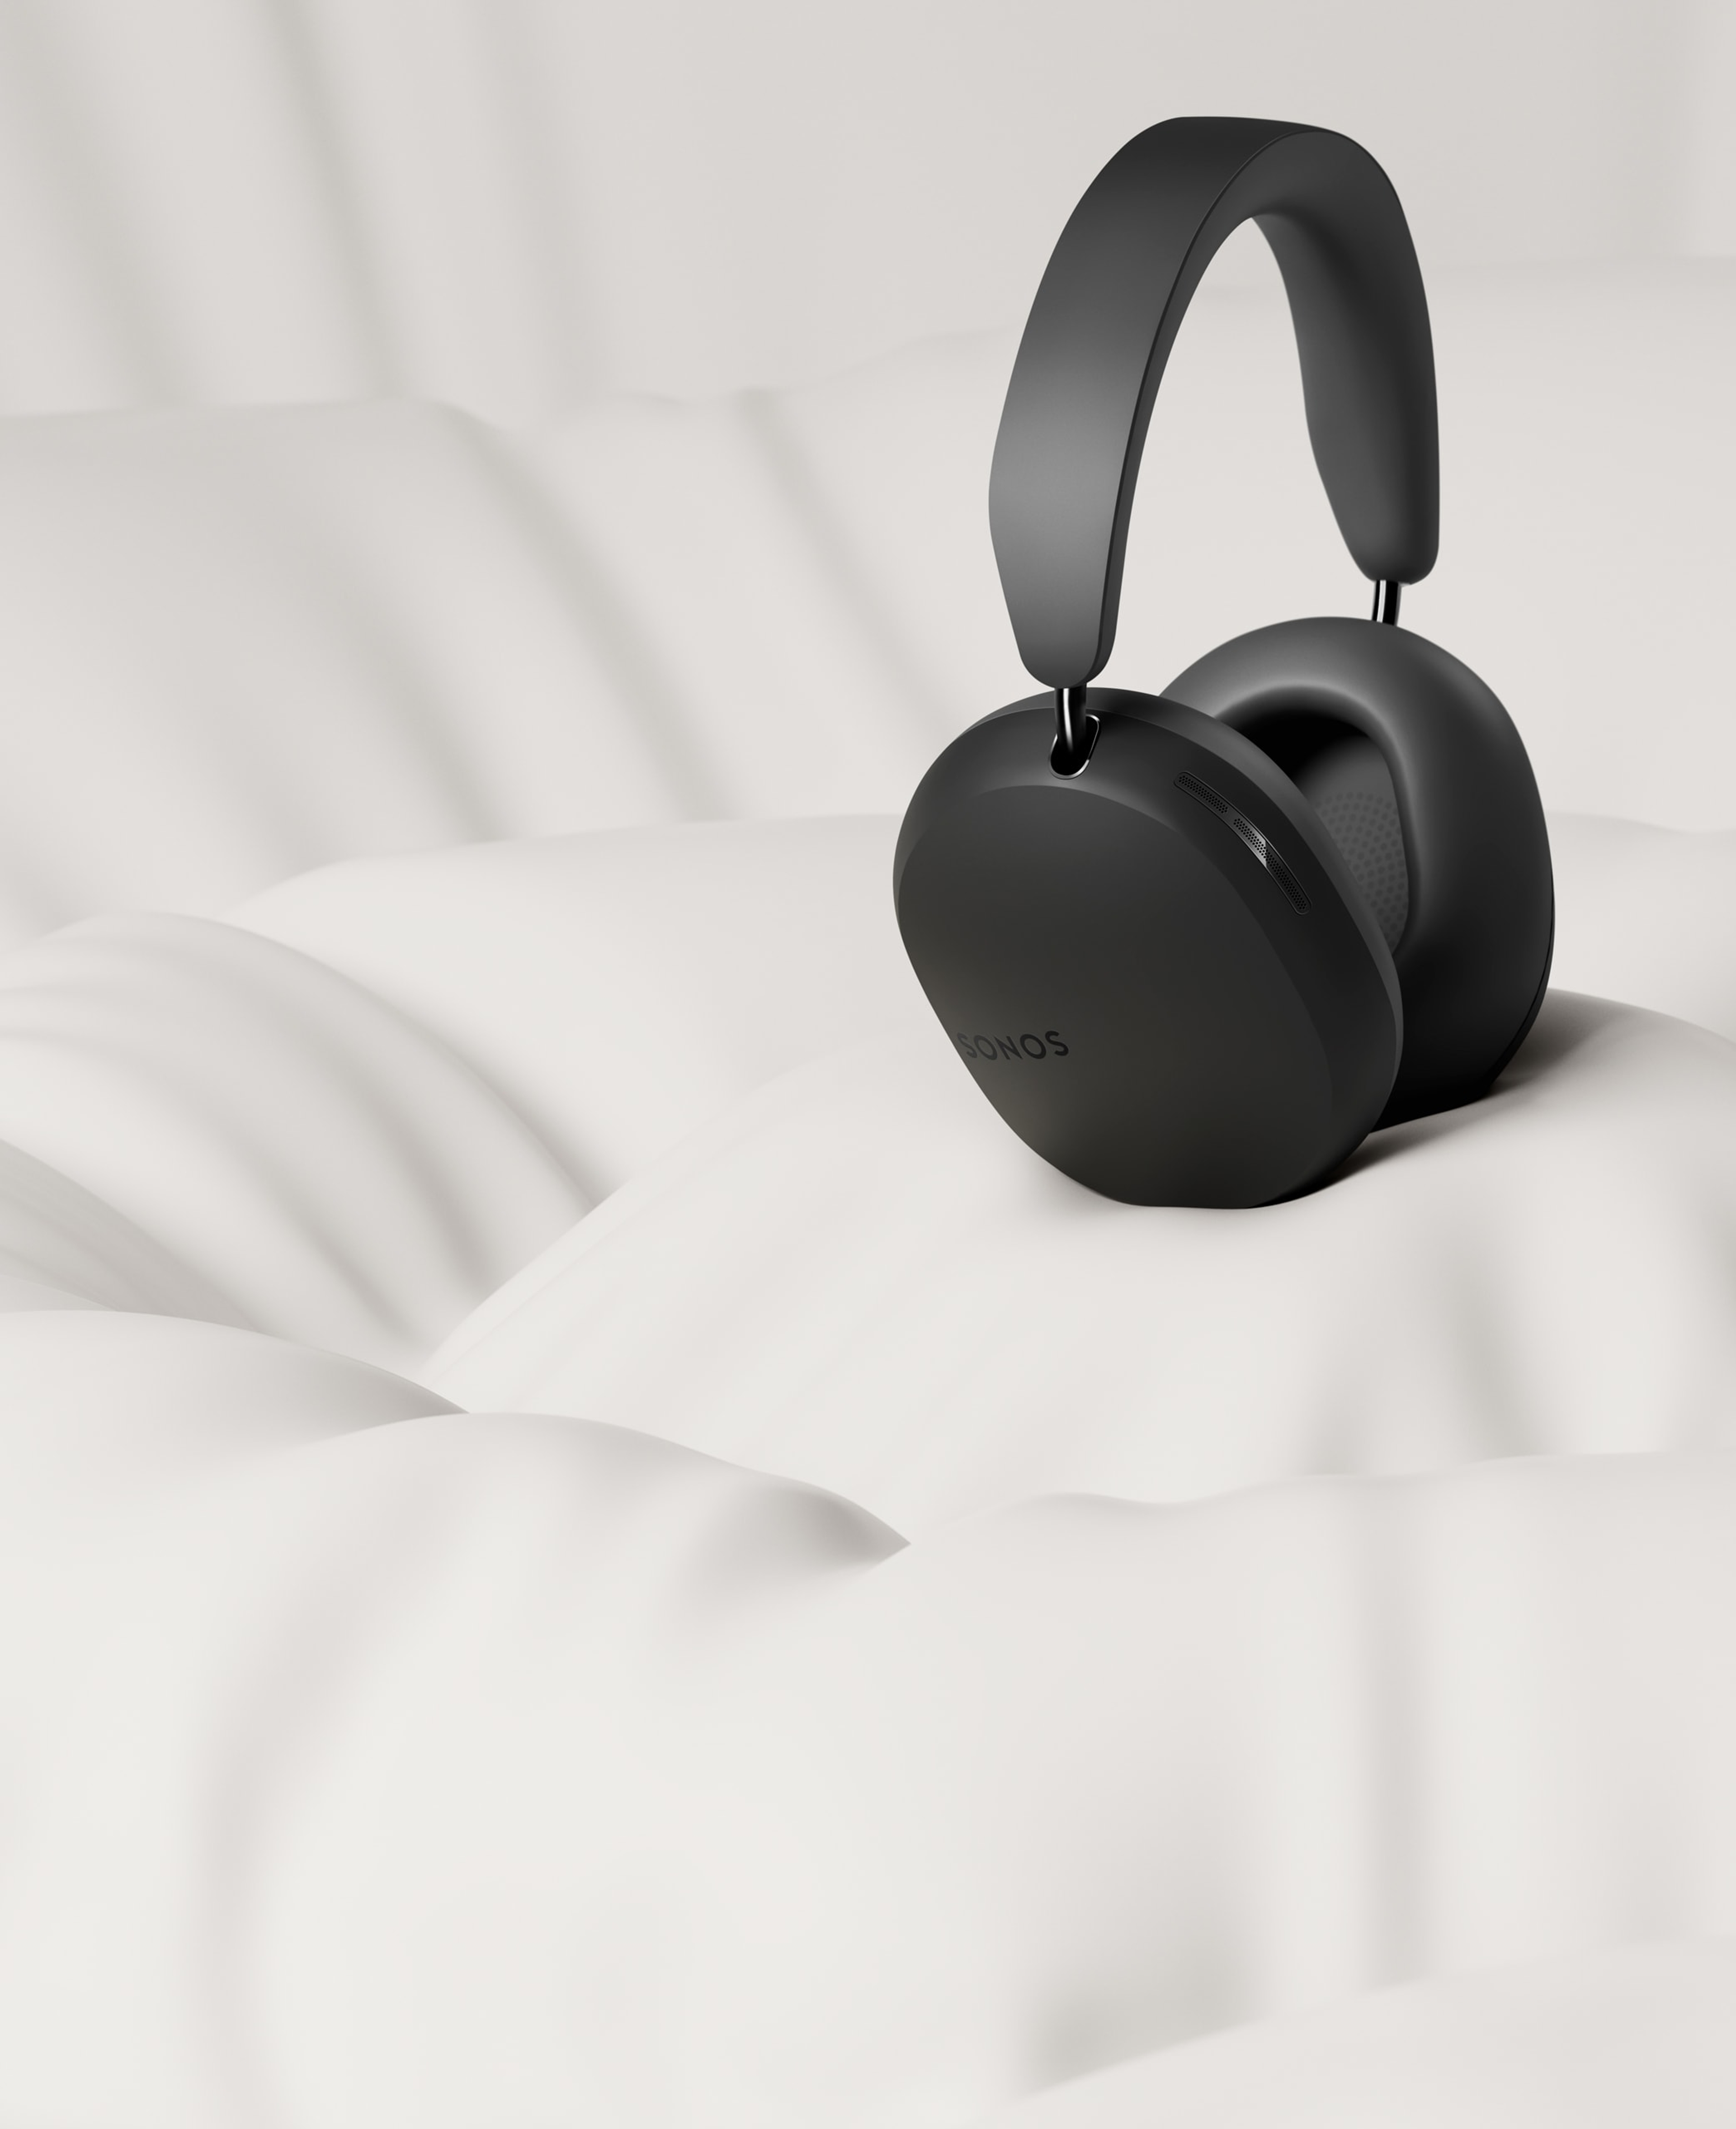 A pair of black Sonos Ace headphones on a pillowy white background